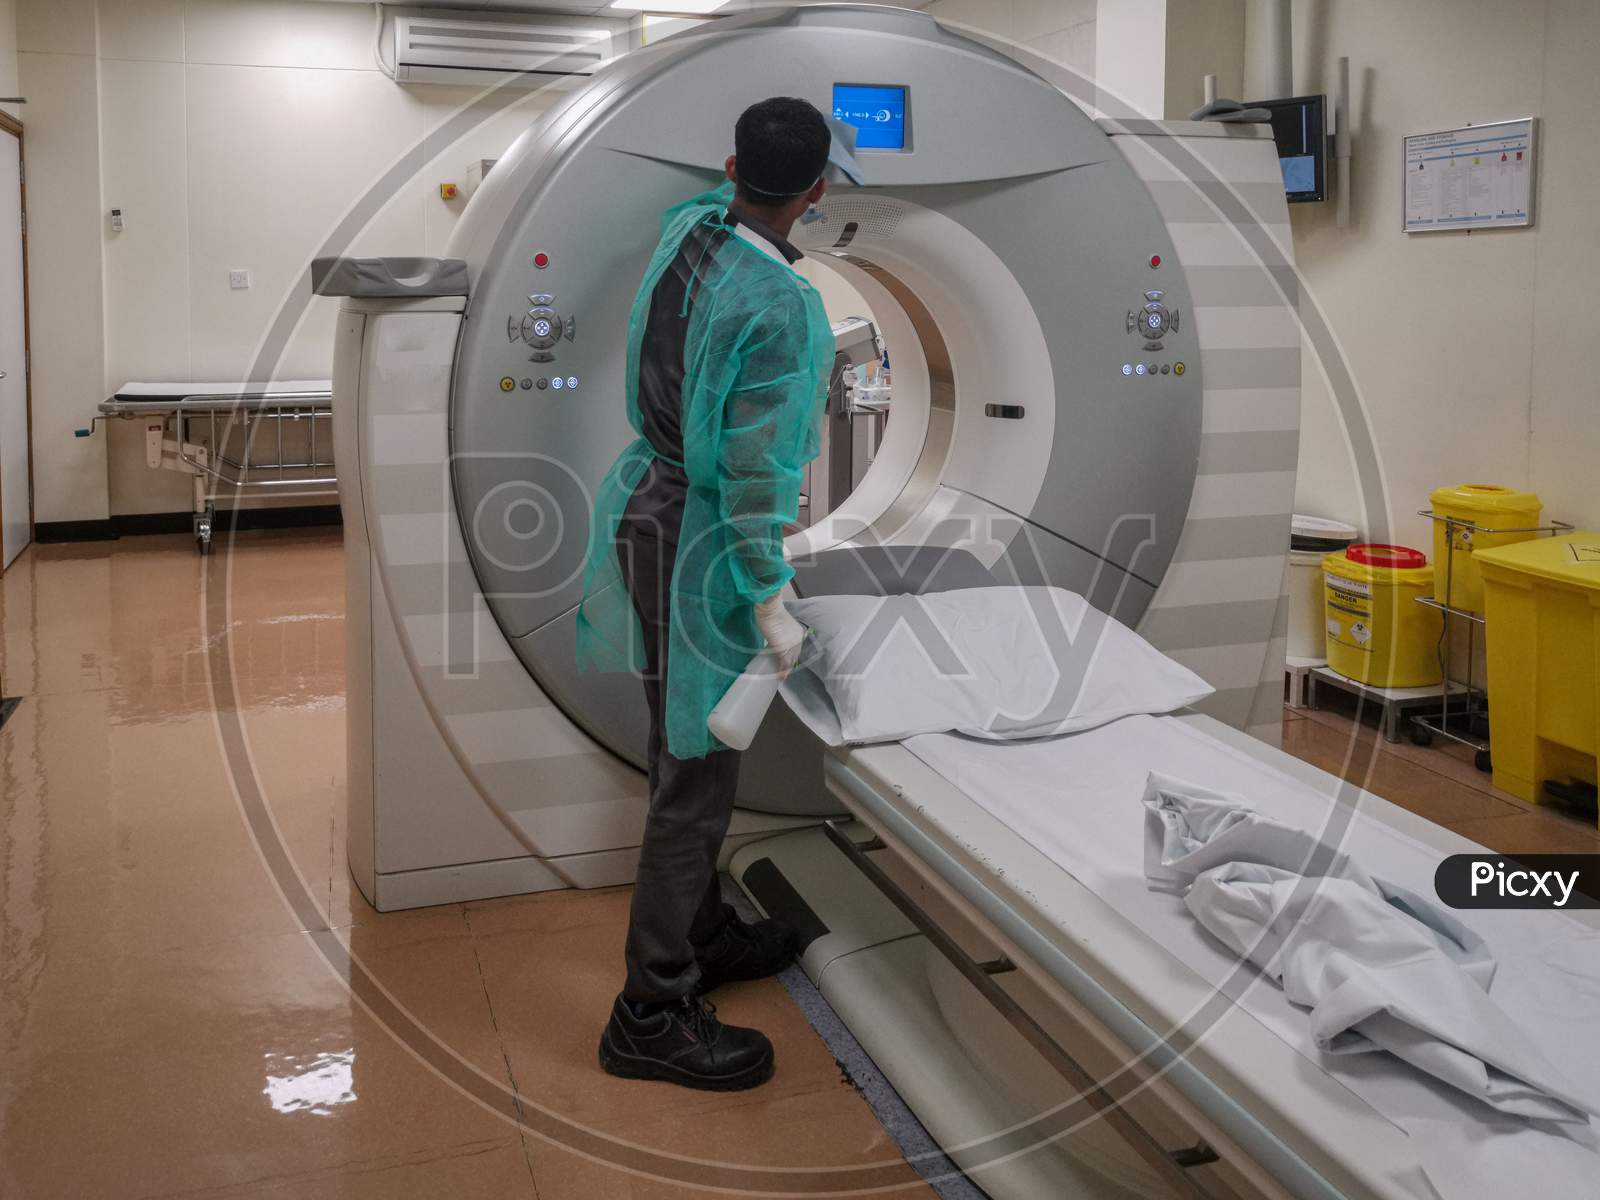 Computed Tomography machine (CT) in Radiology Department with radiology technician wearing personal protective equipment (PPE) disinfecting it